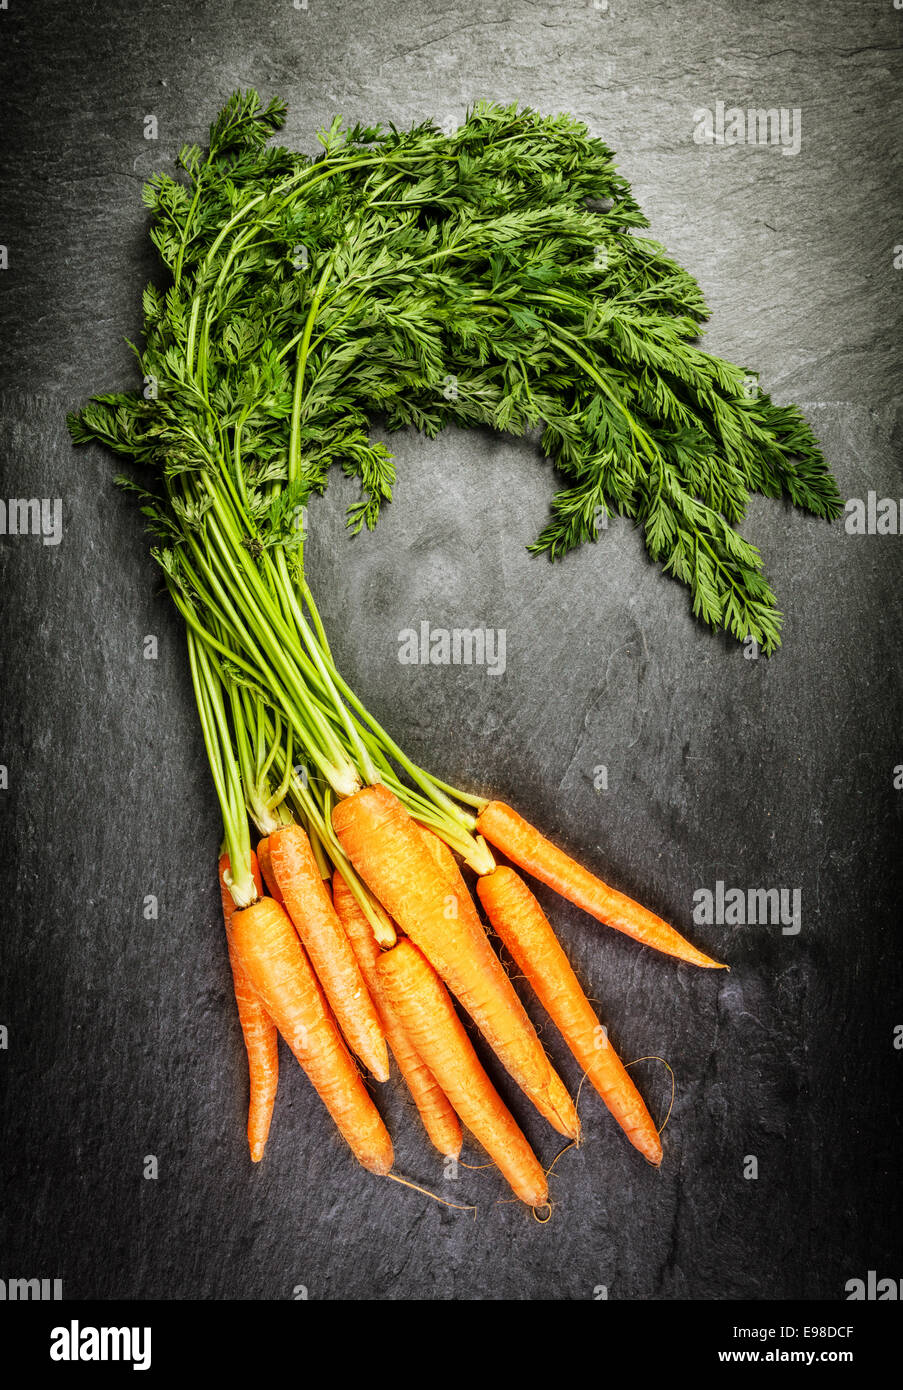 Bunch of fresh farm carrots with their green leaves at a farmers market lying on an old textured slate surface, overhead view Stock Photo